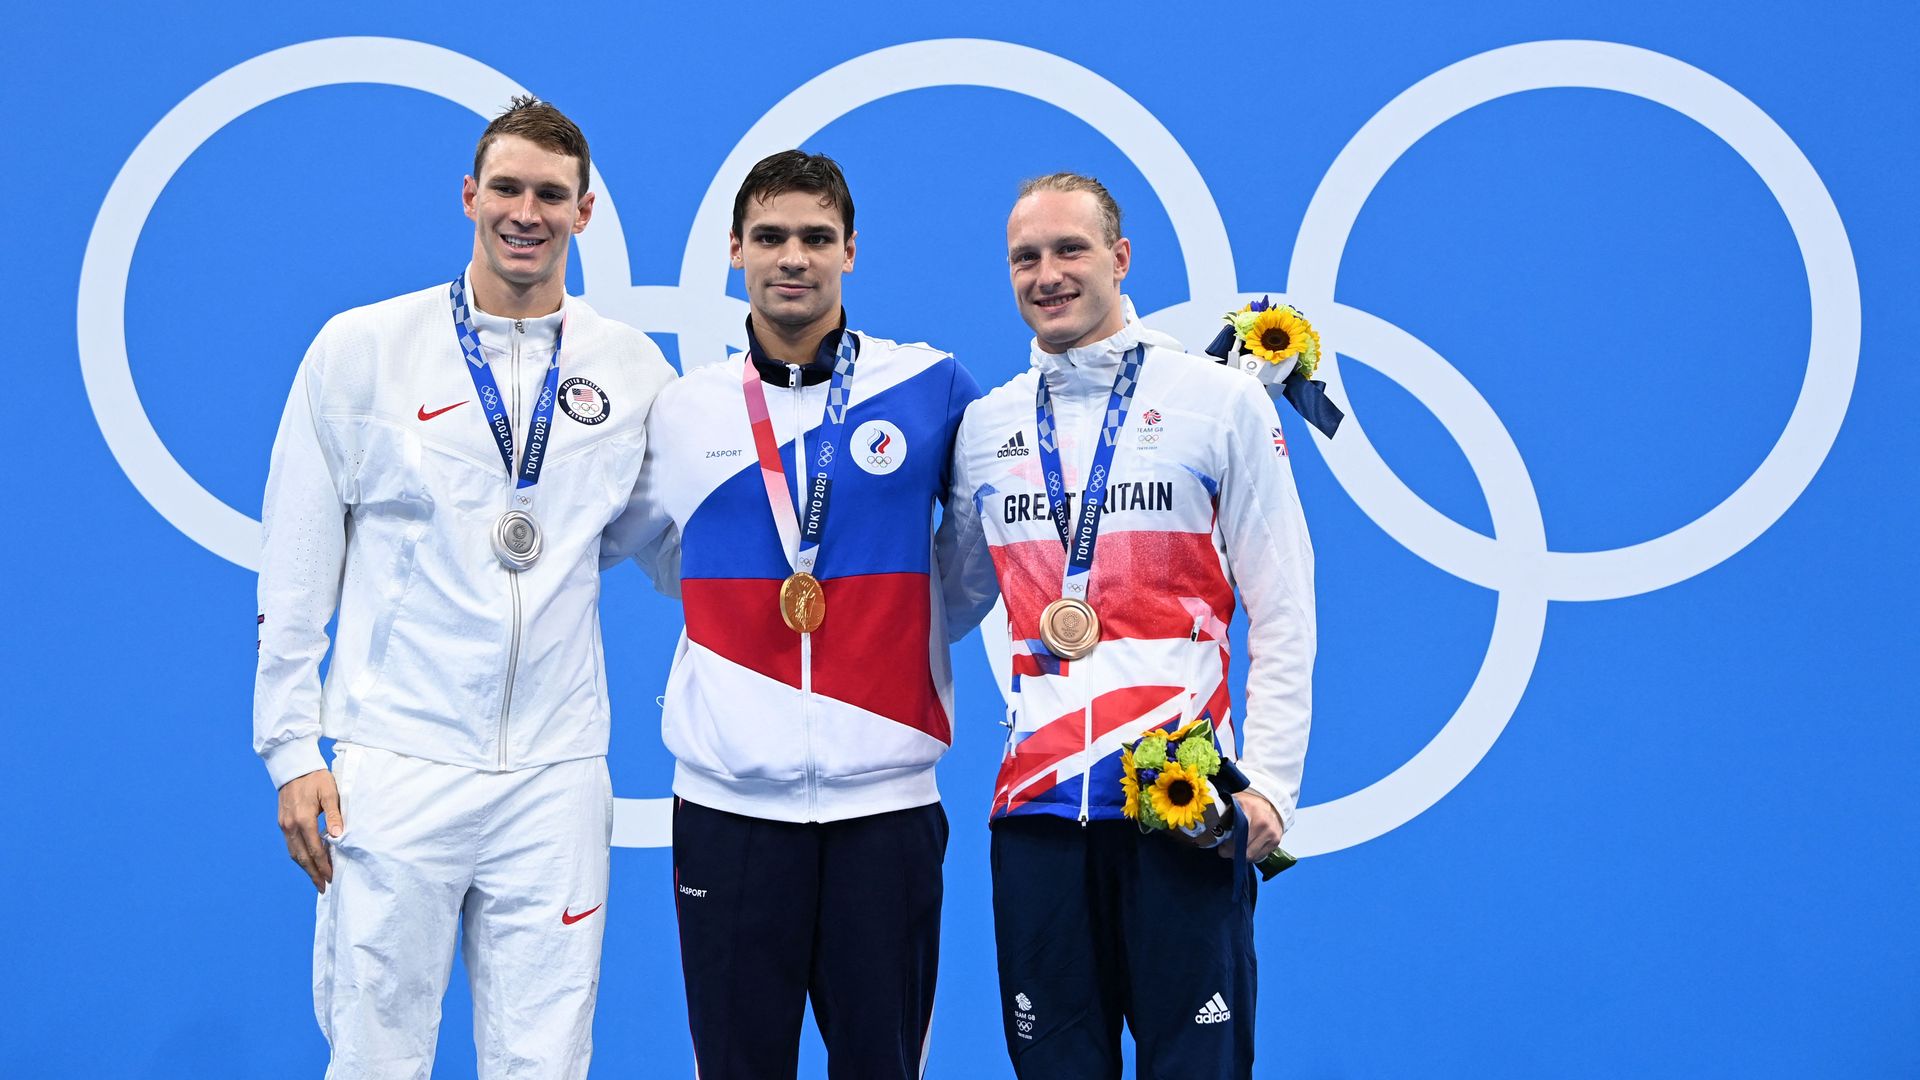 Athletes pose with their medals after the 200m backstroke final.